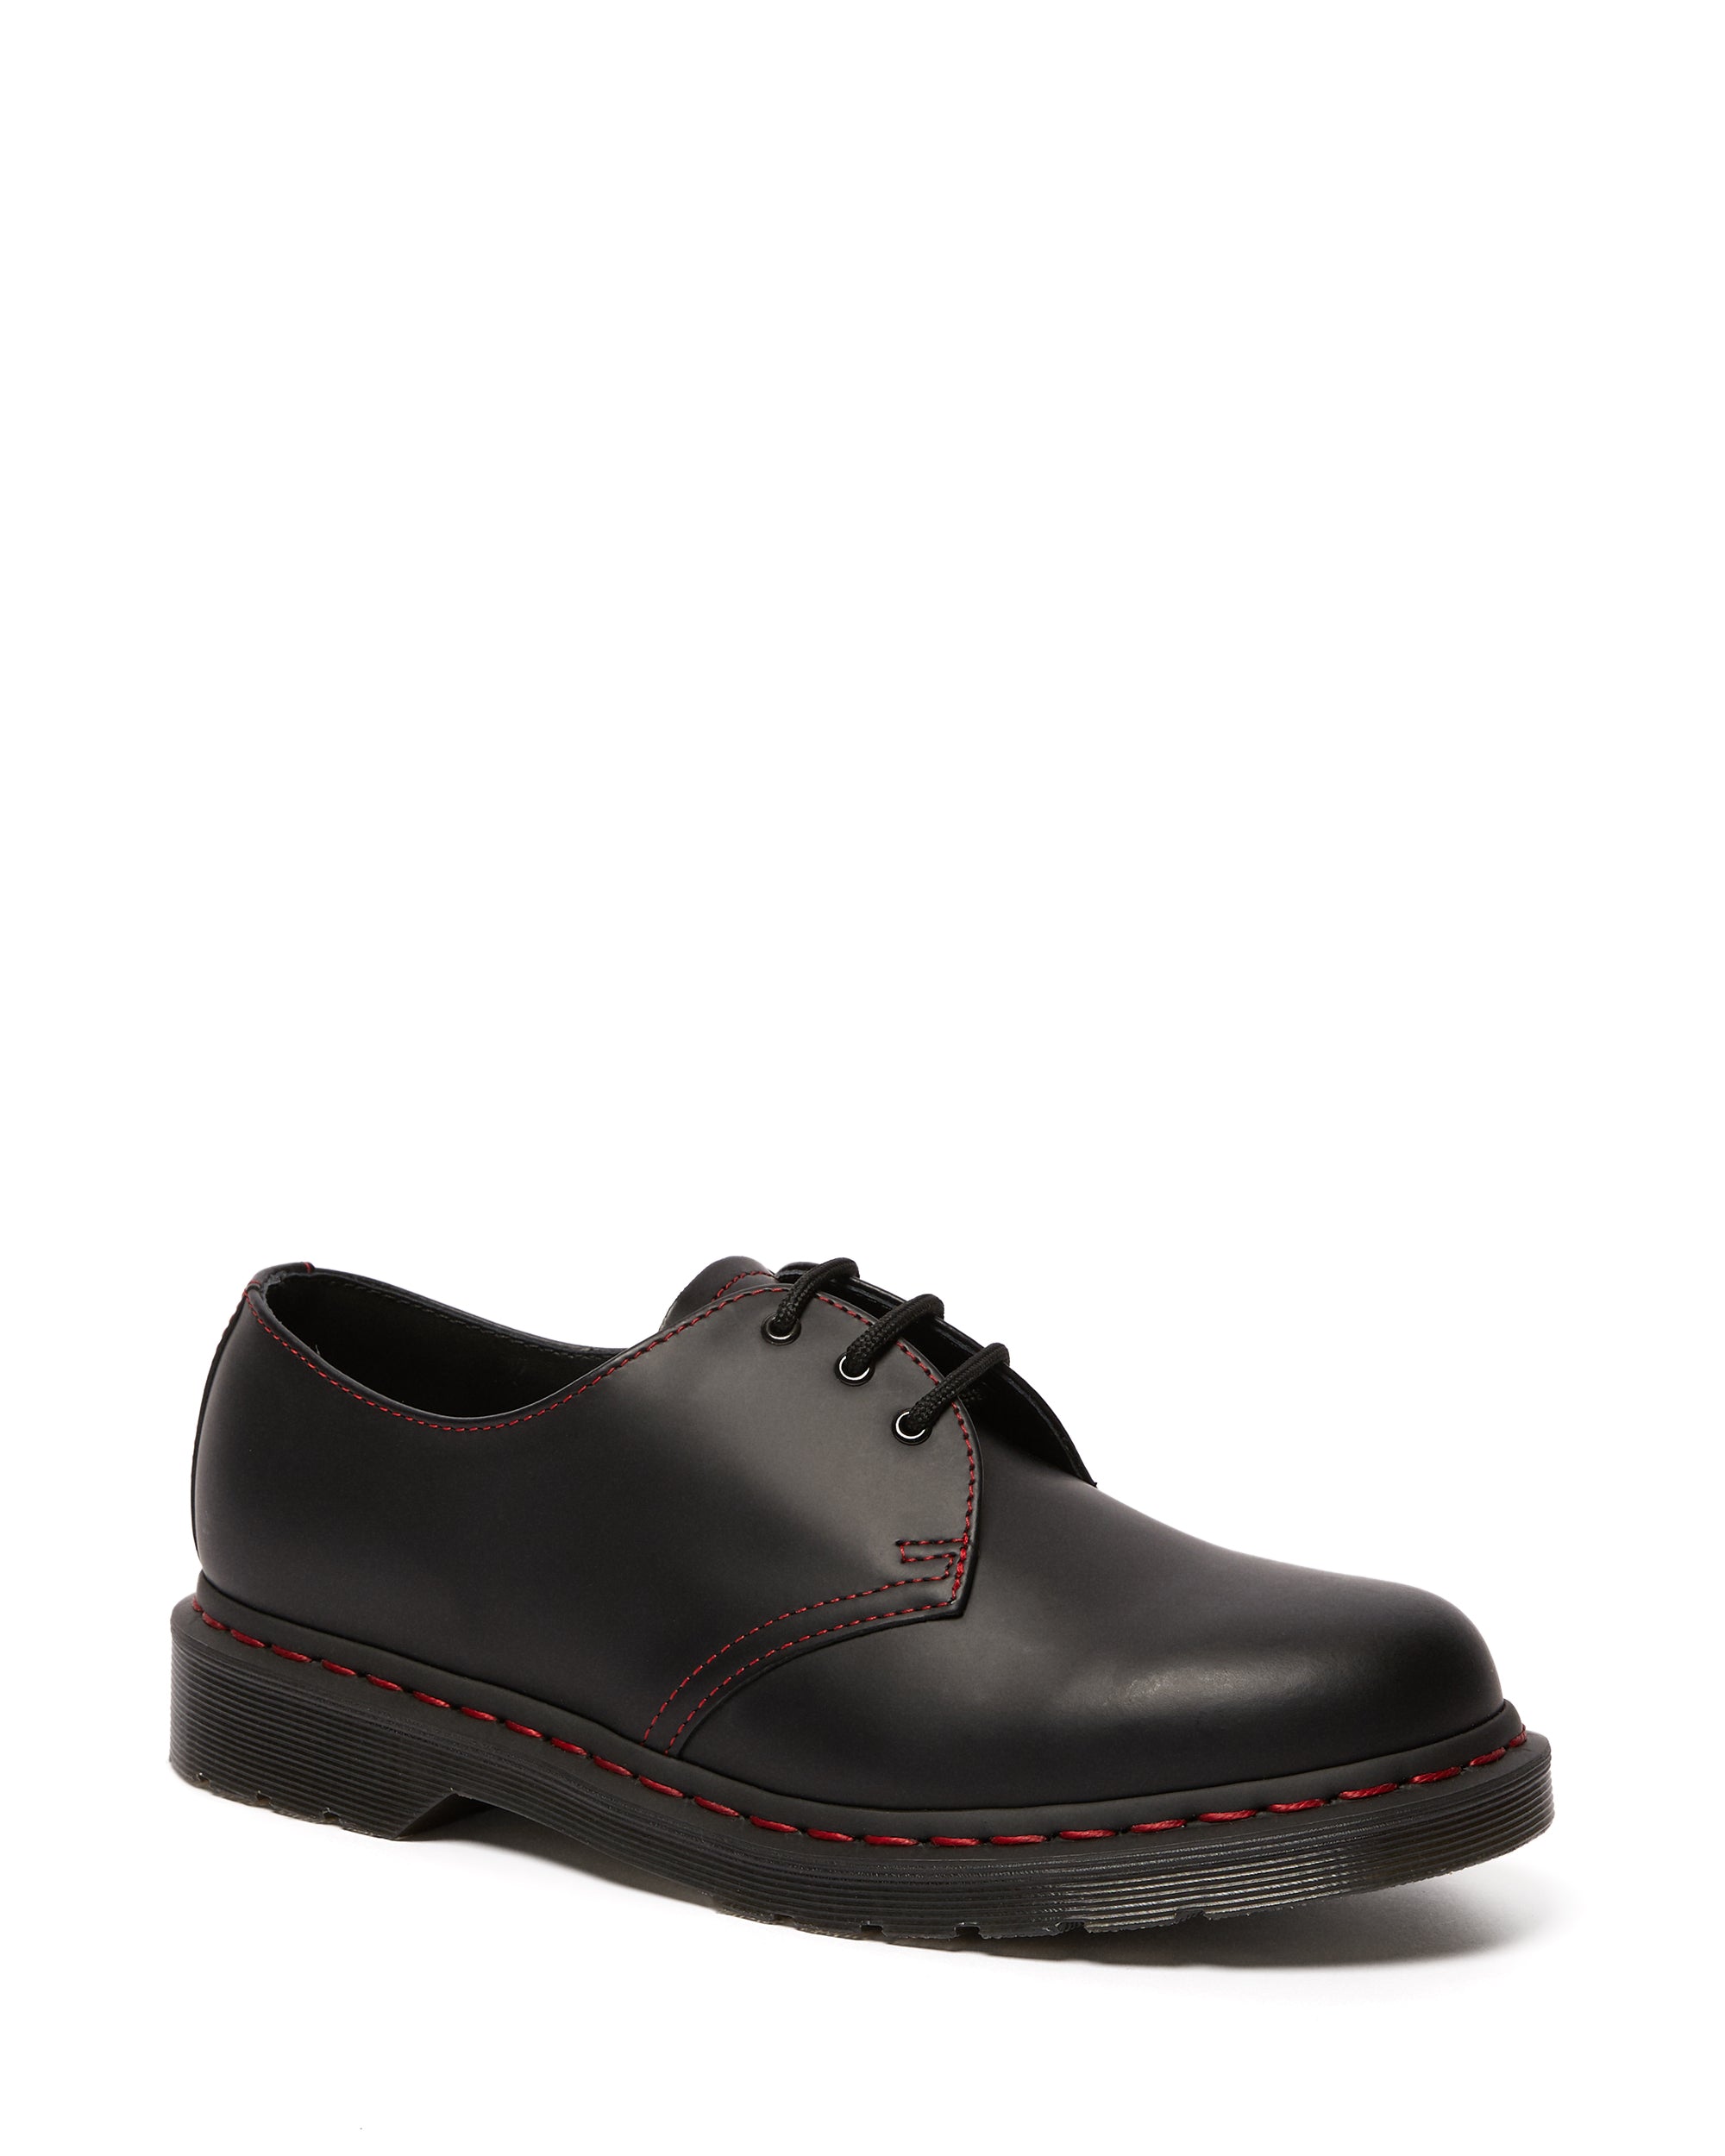 1461 RS BLACK SMOOTH OXFORD – Posers Hollywood